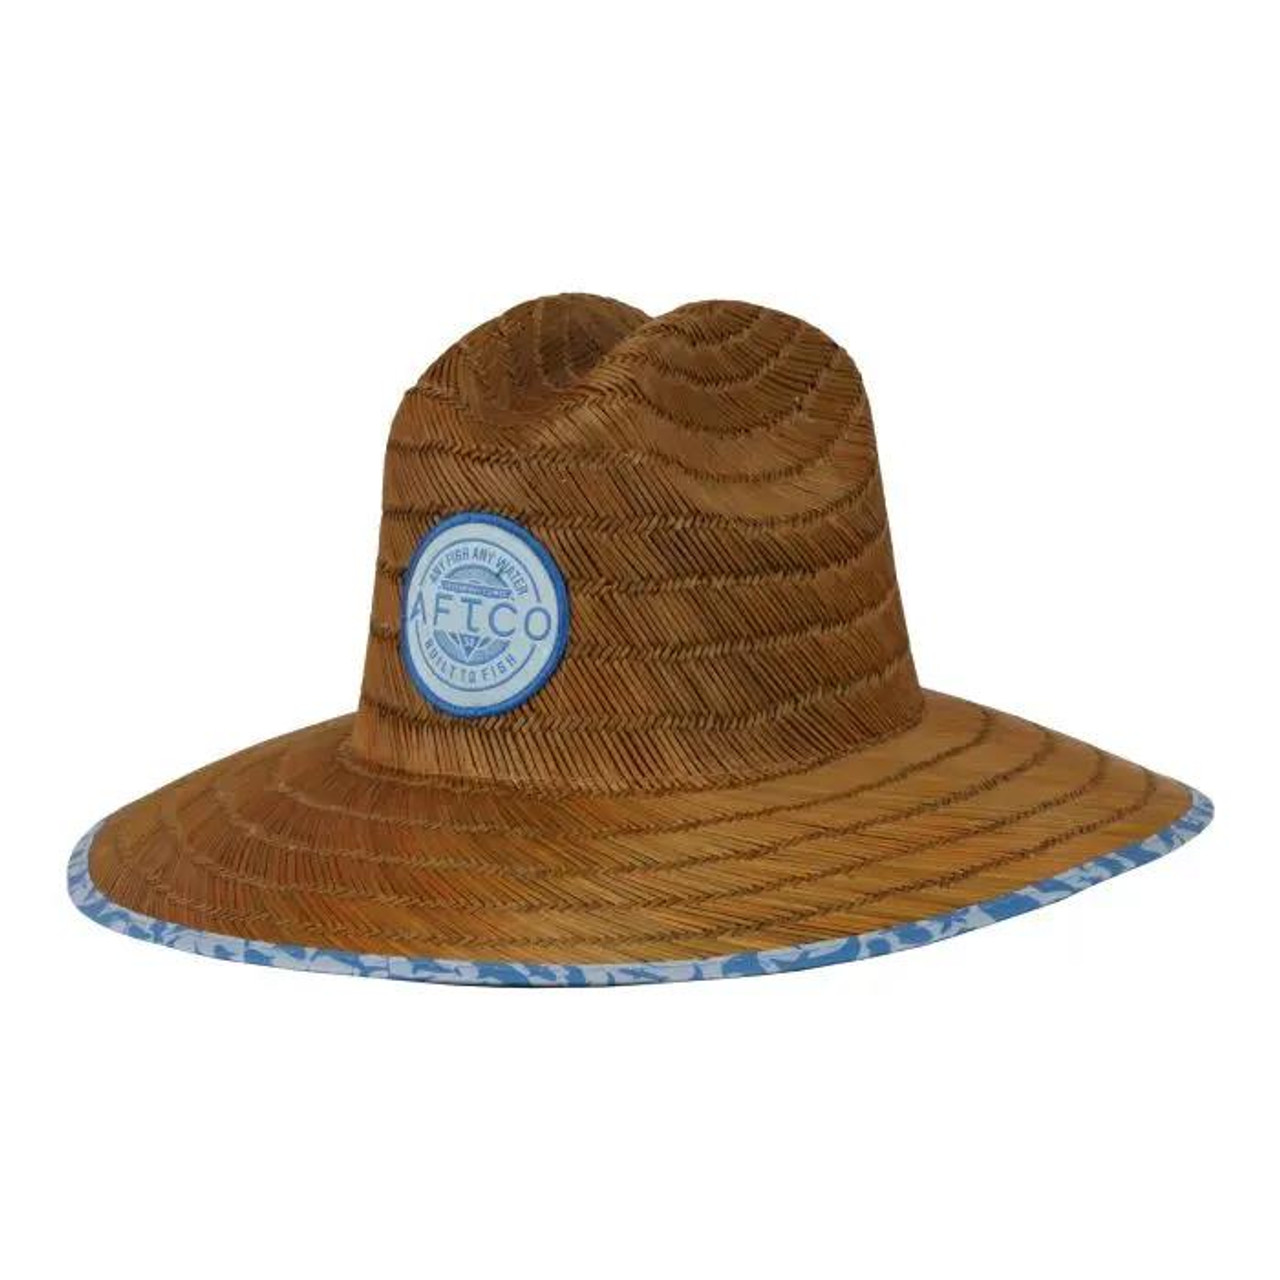 AFTCO Youth Illuminated Straw Hat - Slate Blue - Dance's Sporting Goods